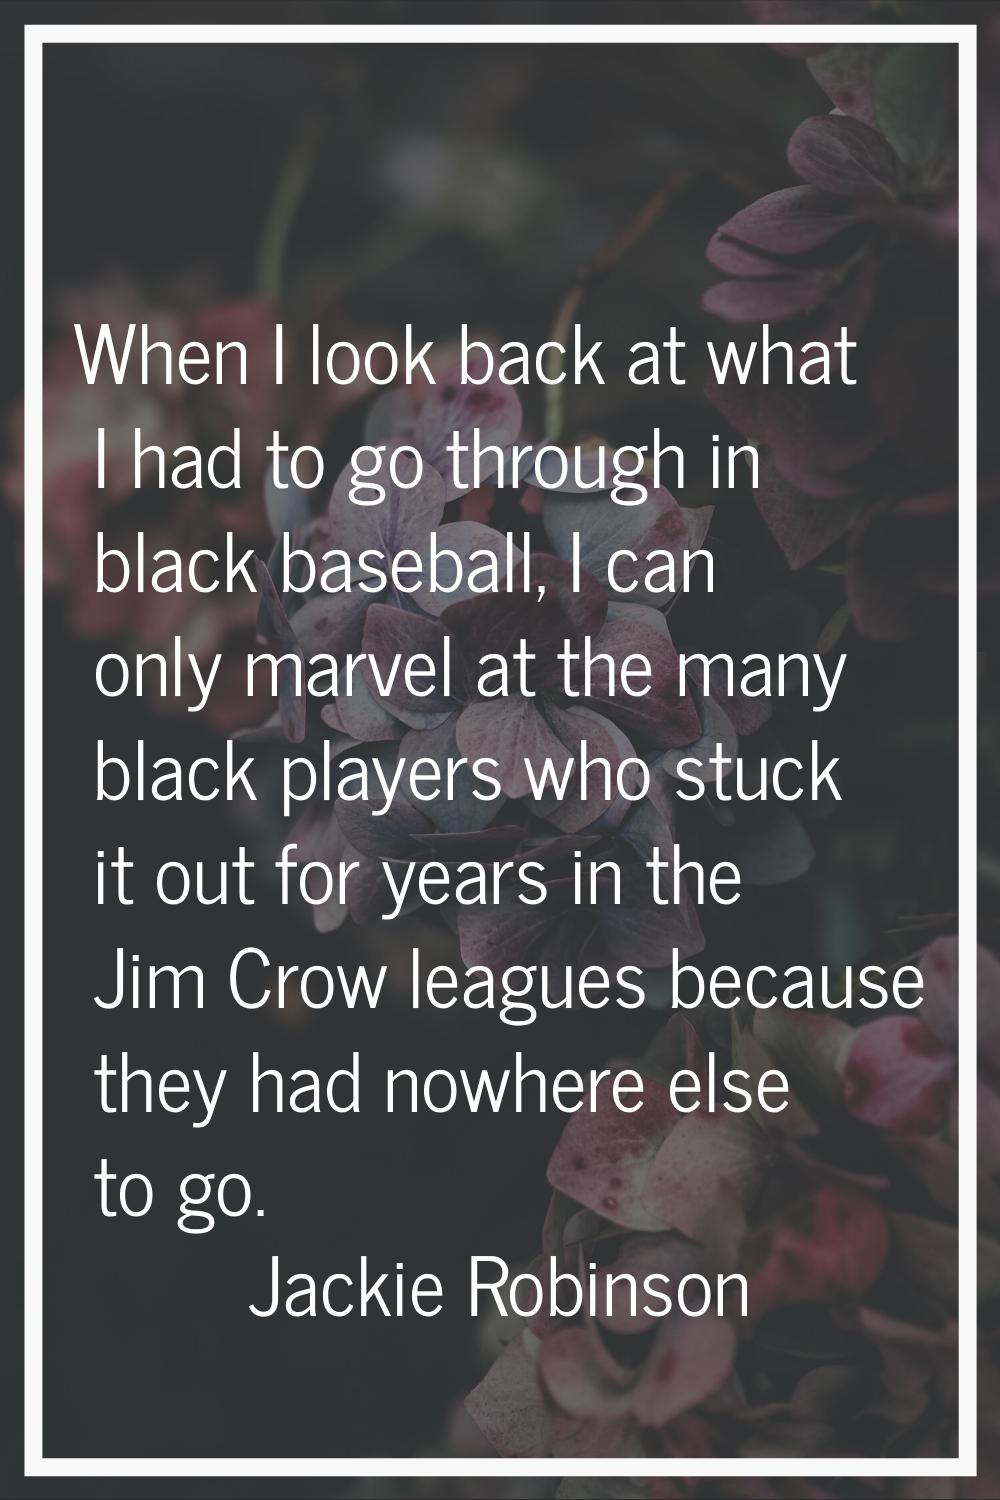 When I look back at what I had to go through in black baseball, I can only marvel at the many black